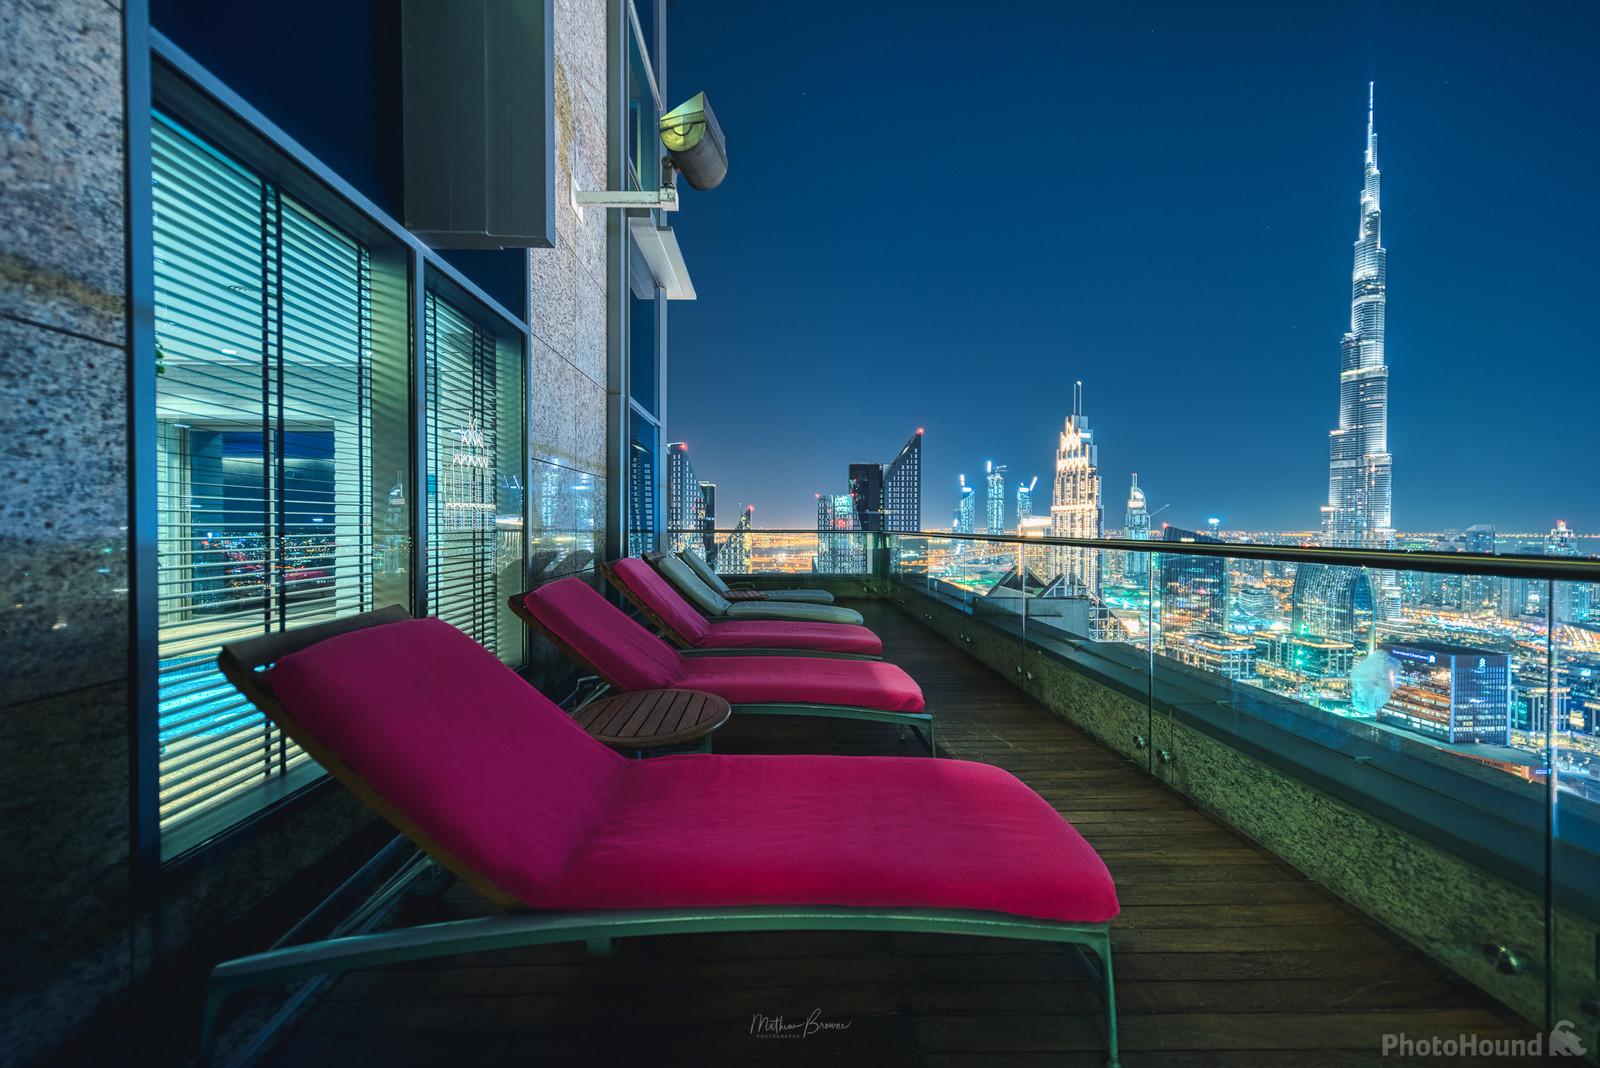 Image of The View At 42 - Shangri-La Hotel by Mathew Browne